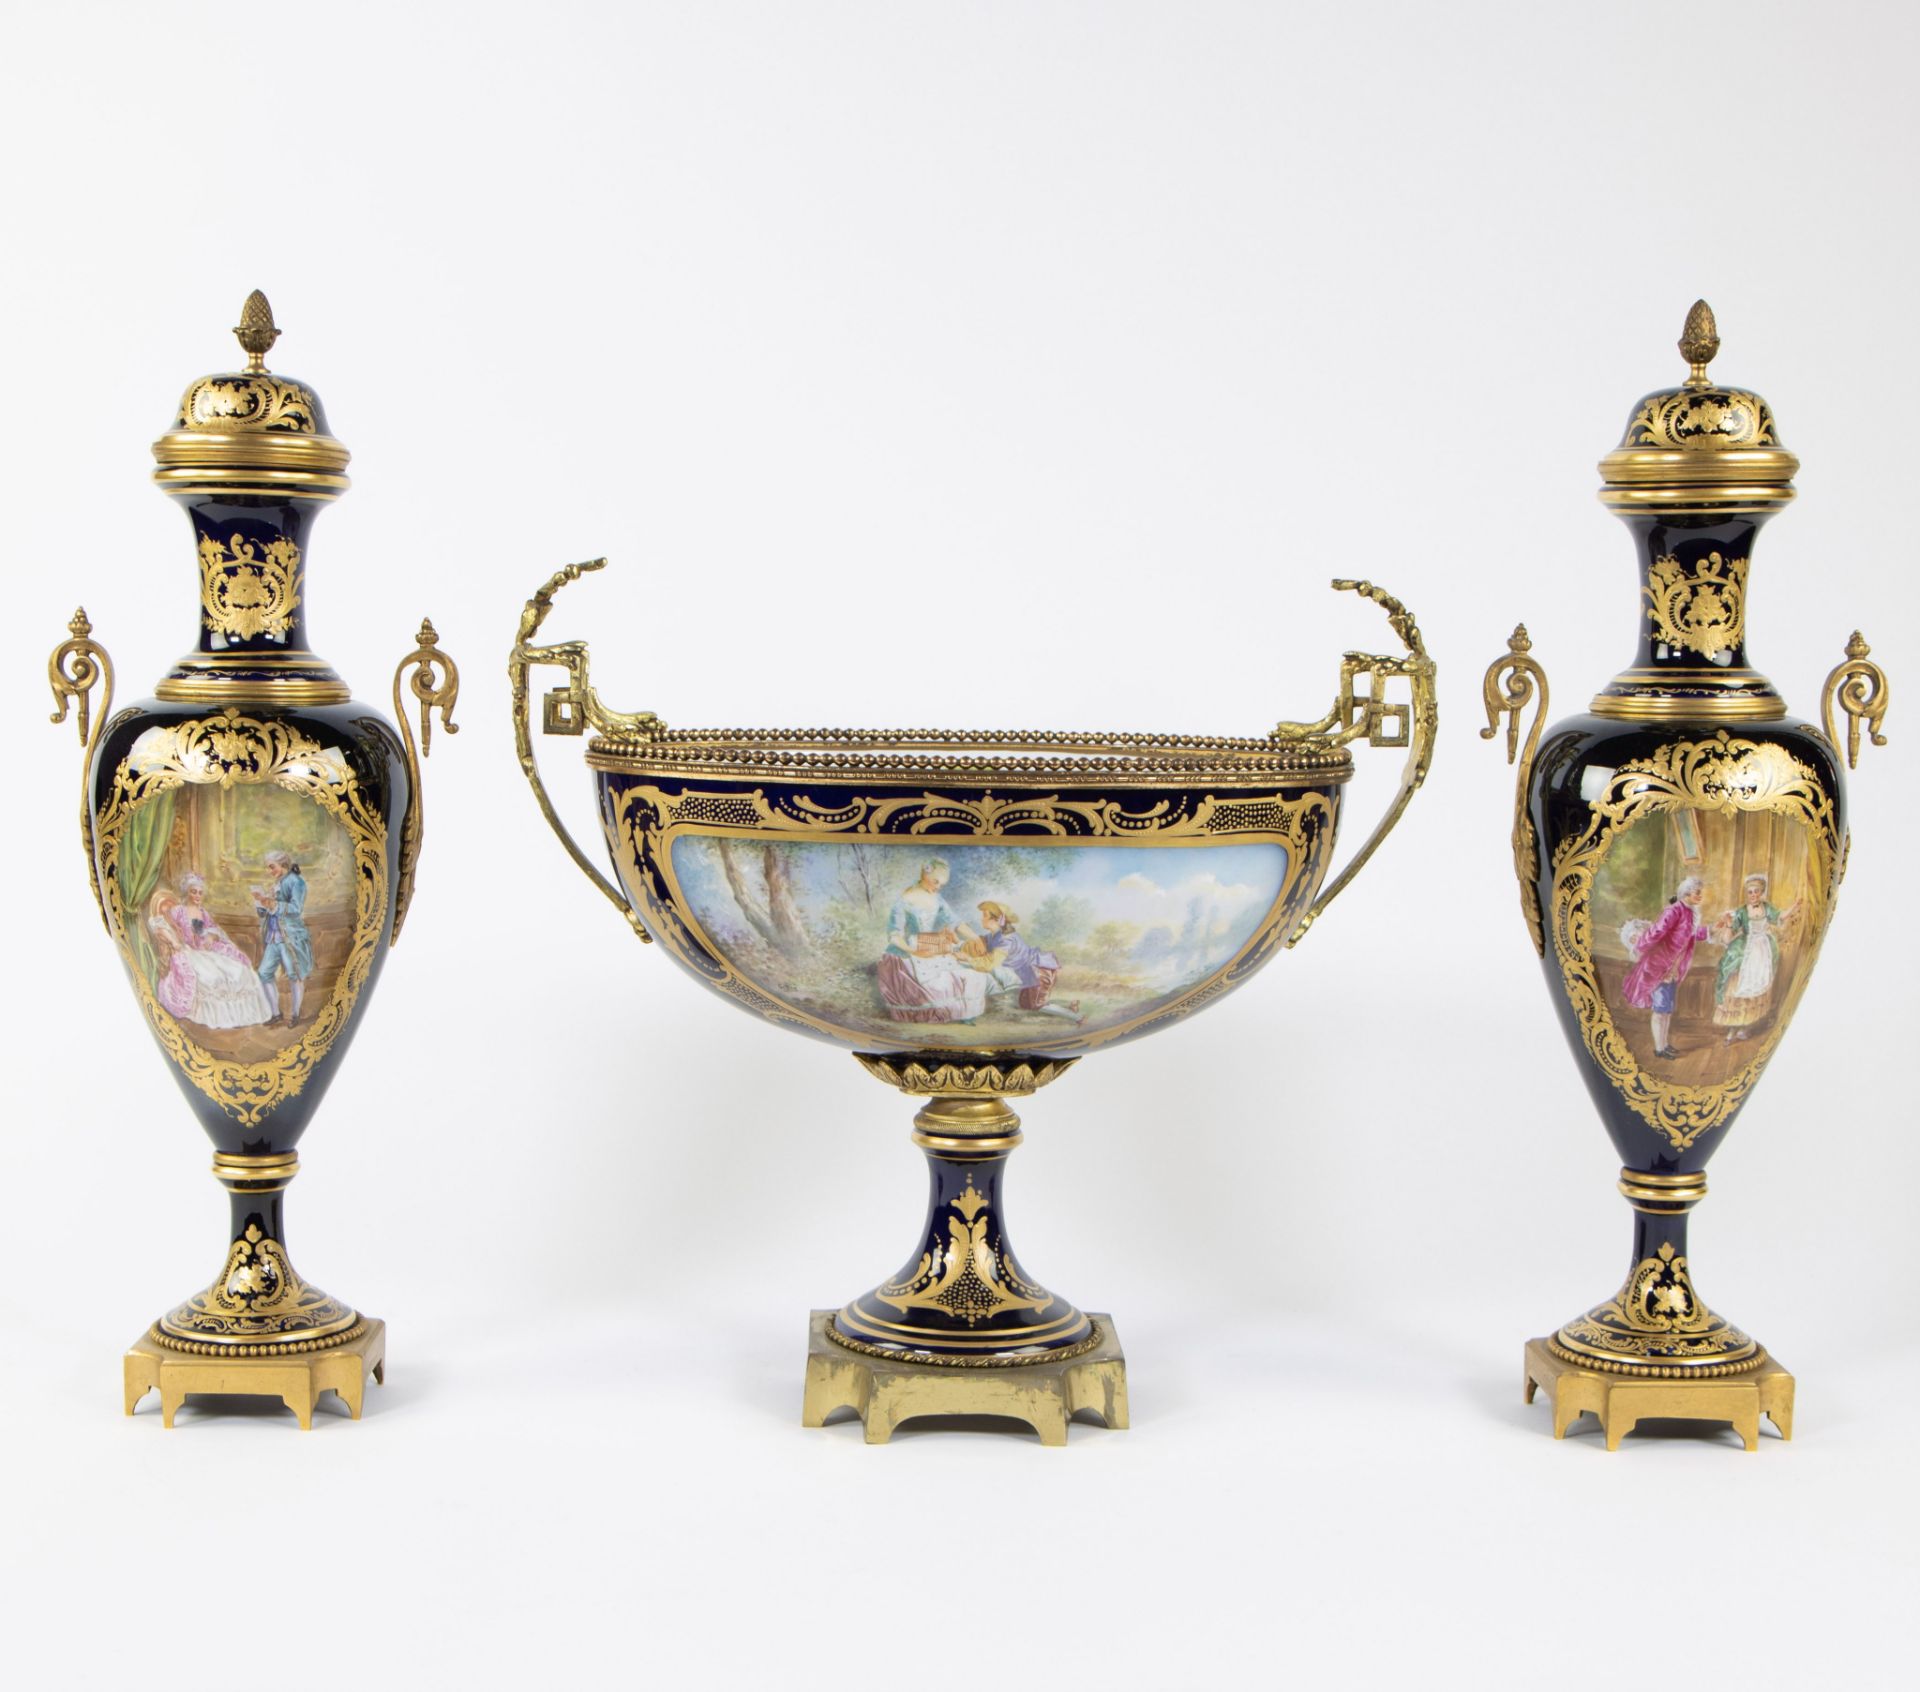 A three-part garnish with bronze mounts in Sèvres porcelain, France, marked